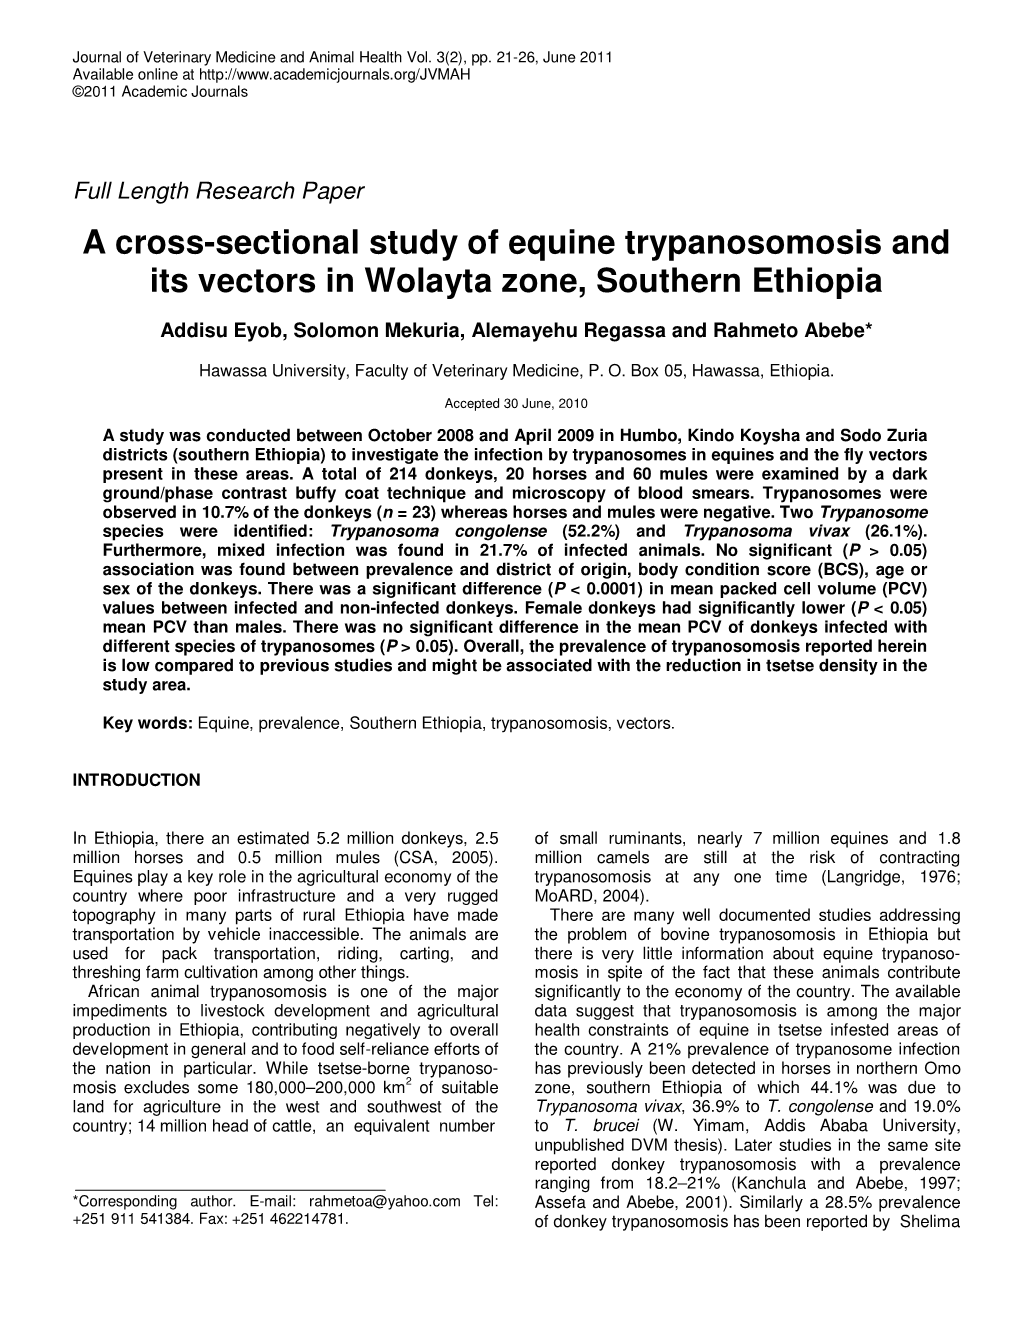 A Cross-Sectional Study of Equine Trypanosomosis and Its Vectors in Wolayta Zone, Southern Ethiopia